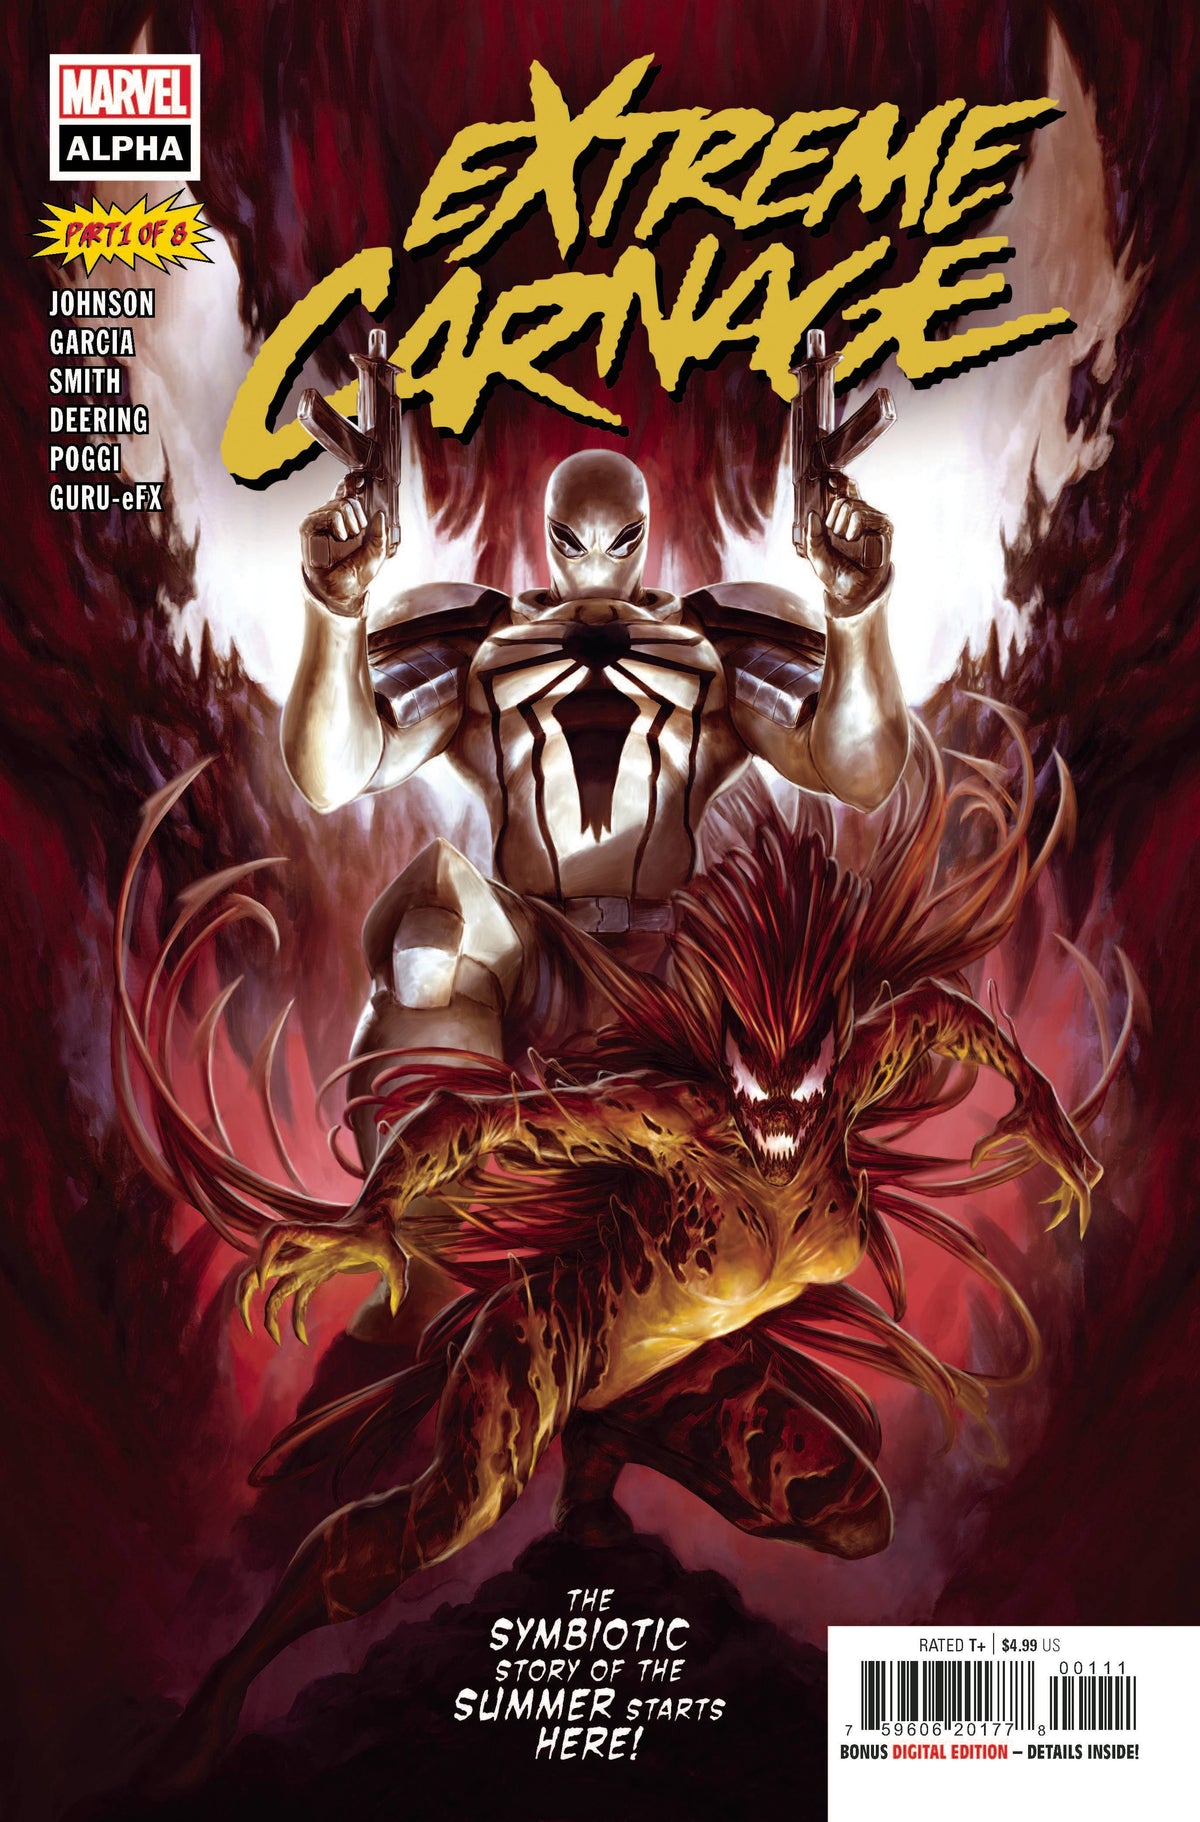 Photo of Extreme Carnage Alpha Issue 1 comic sold by Stronghold Collectibles